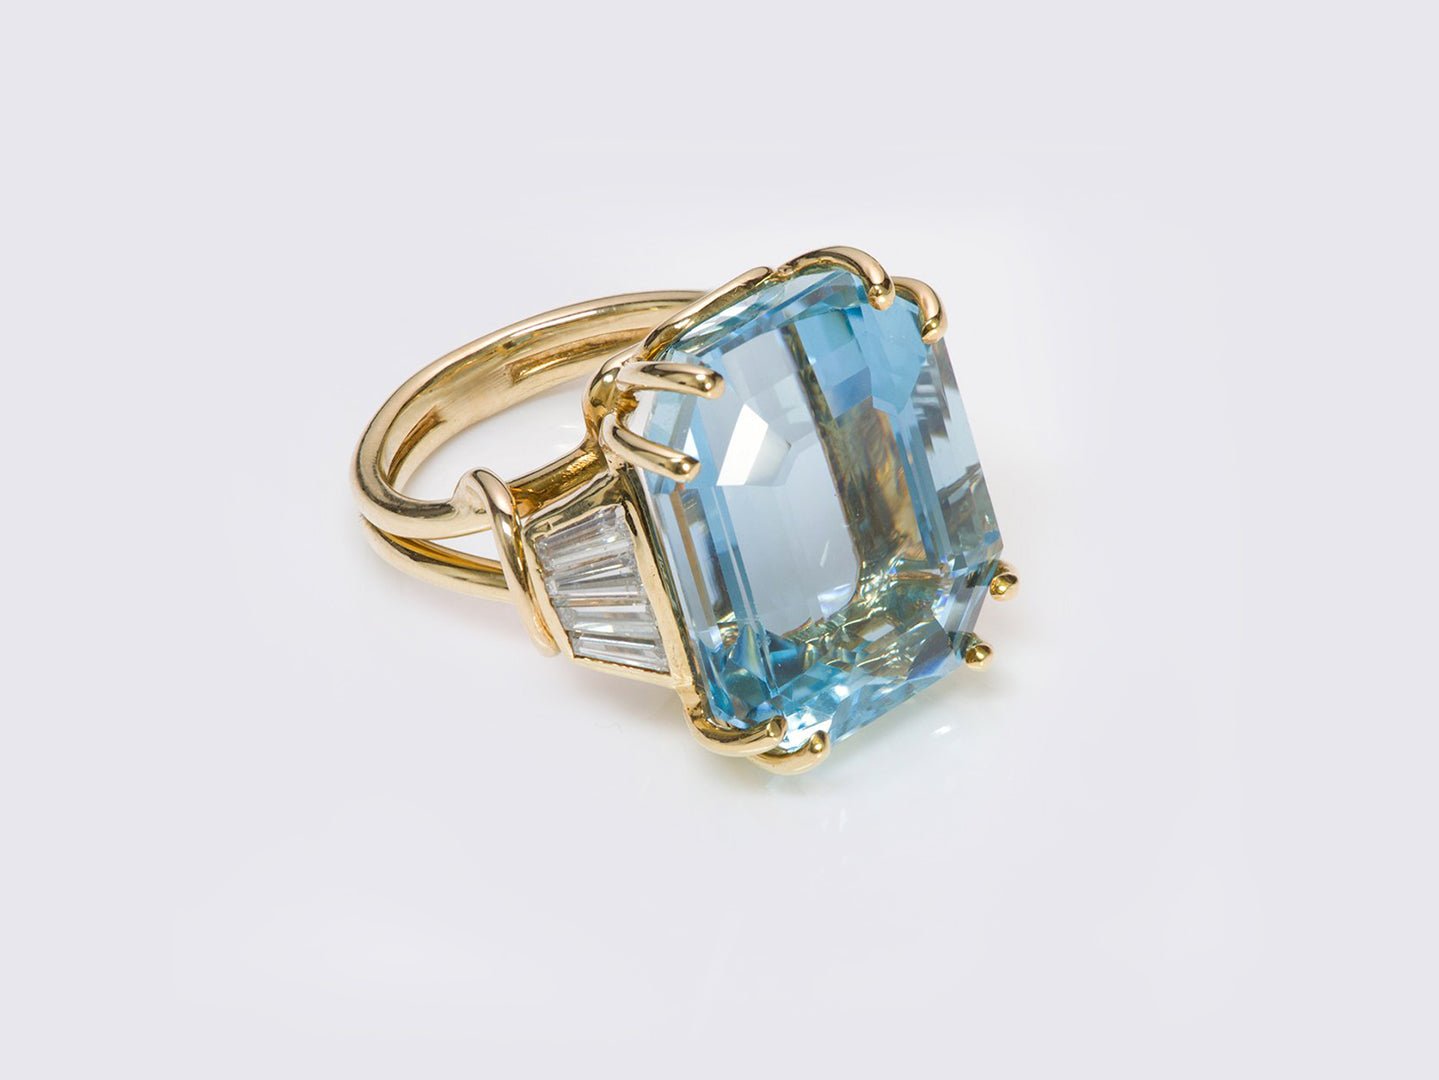 Aquamarine - The Stone of Courage and Protection - DSF Antique Jewelry